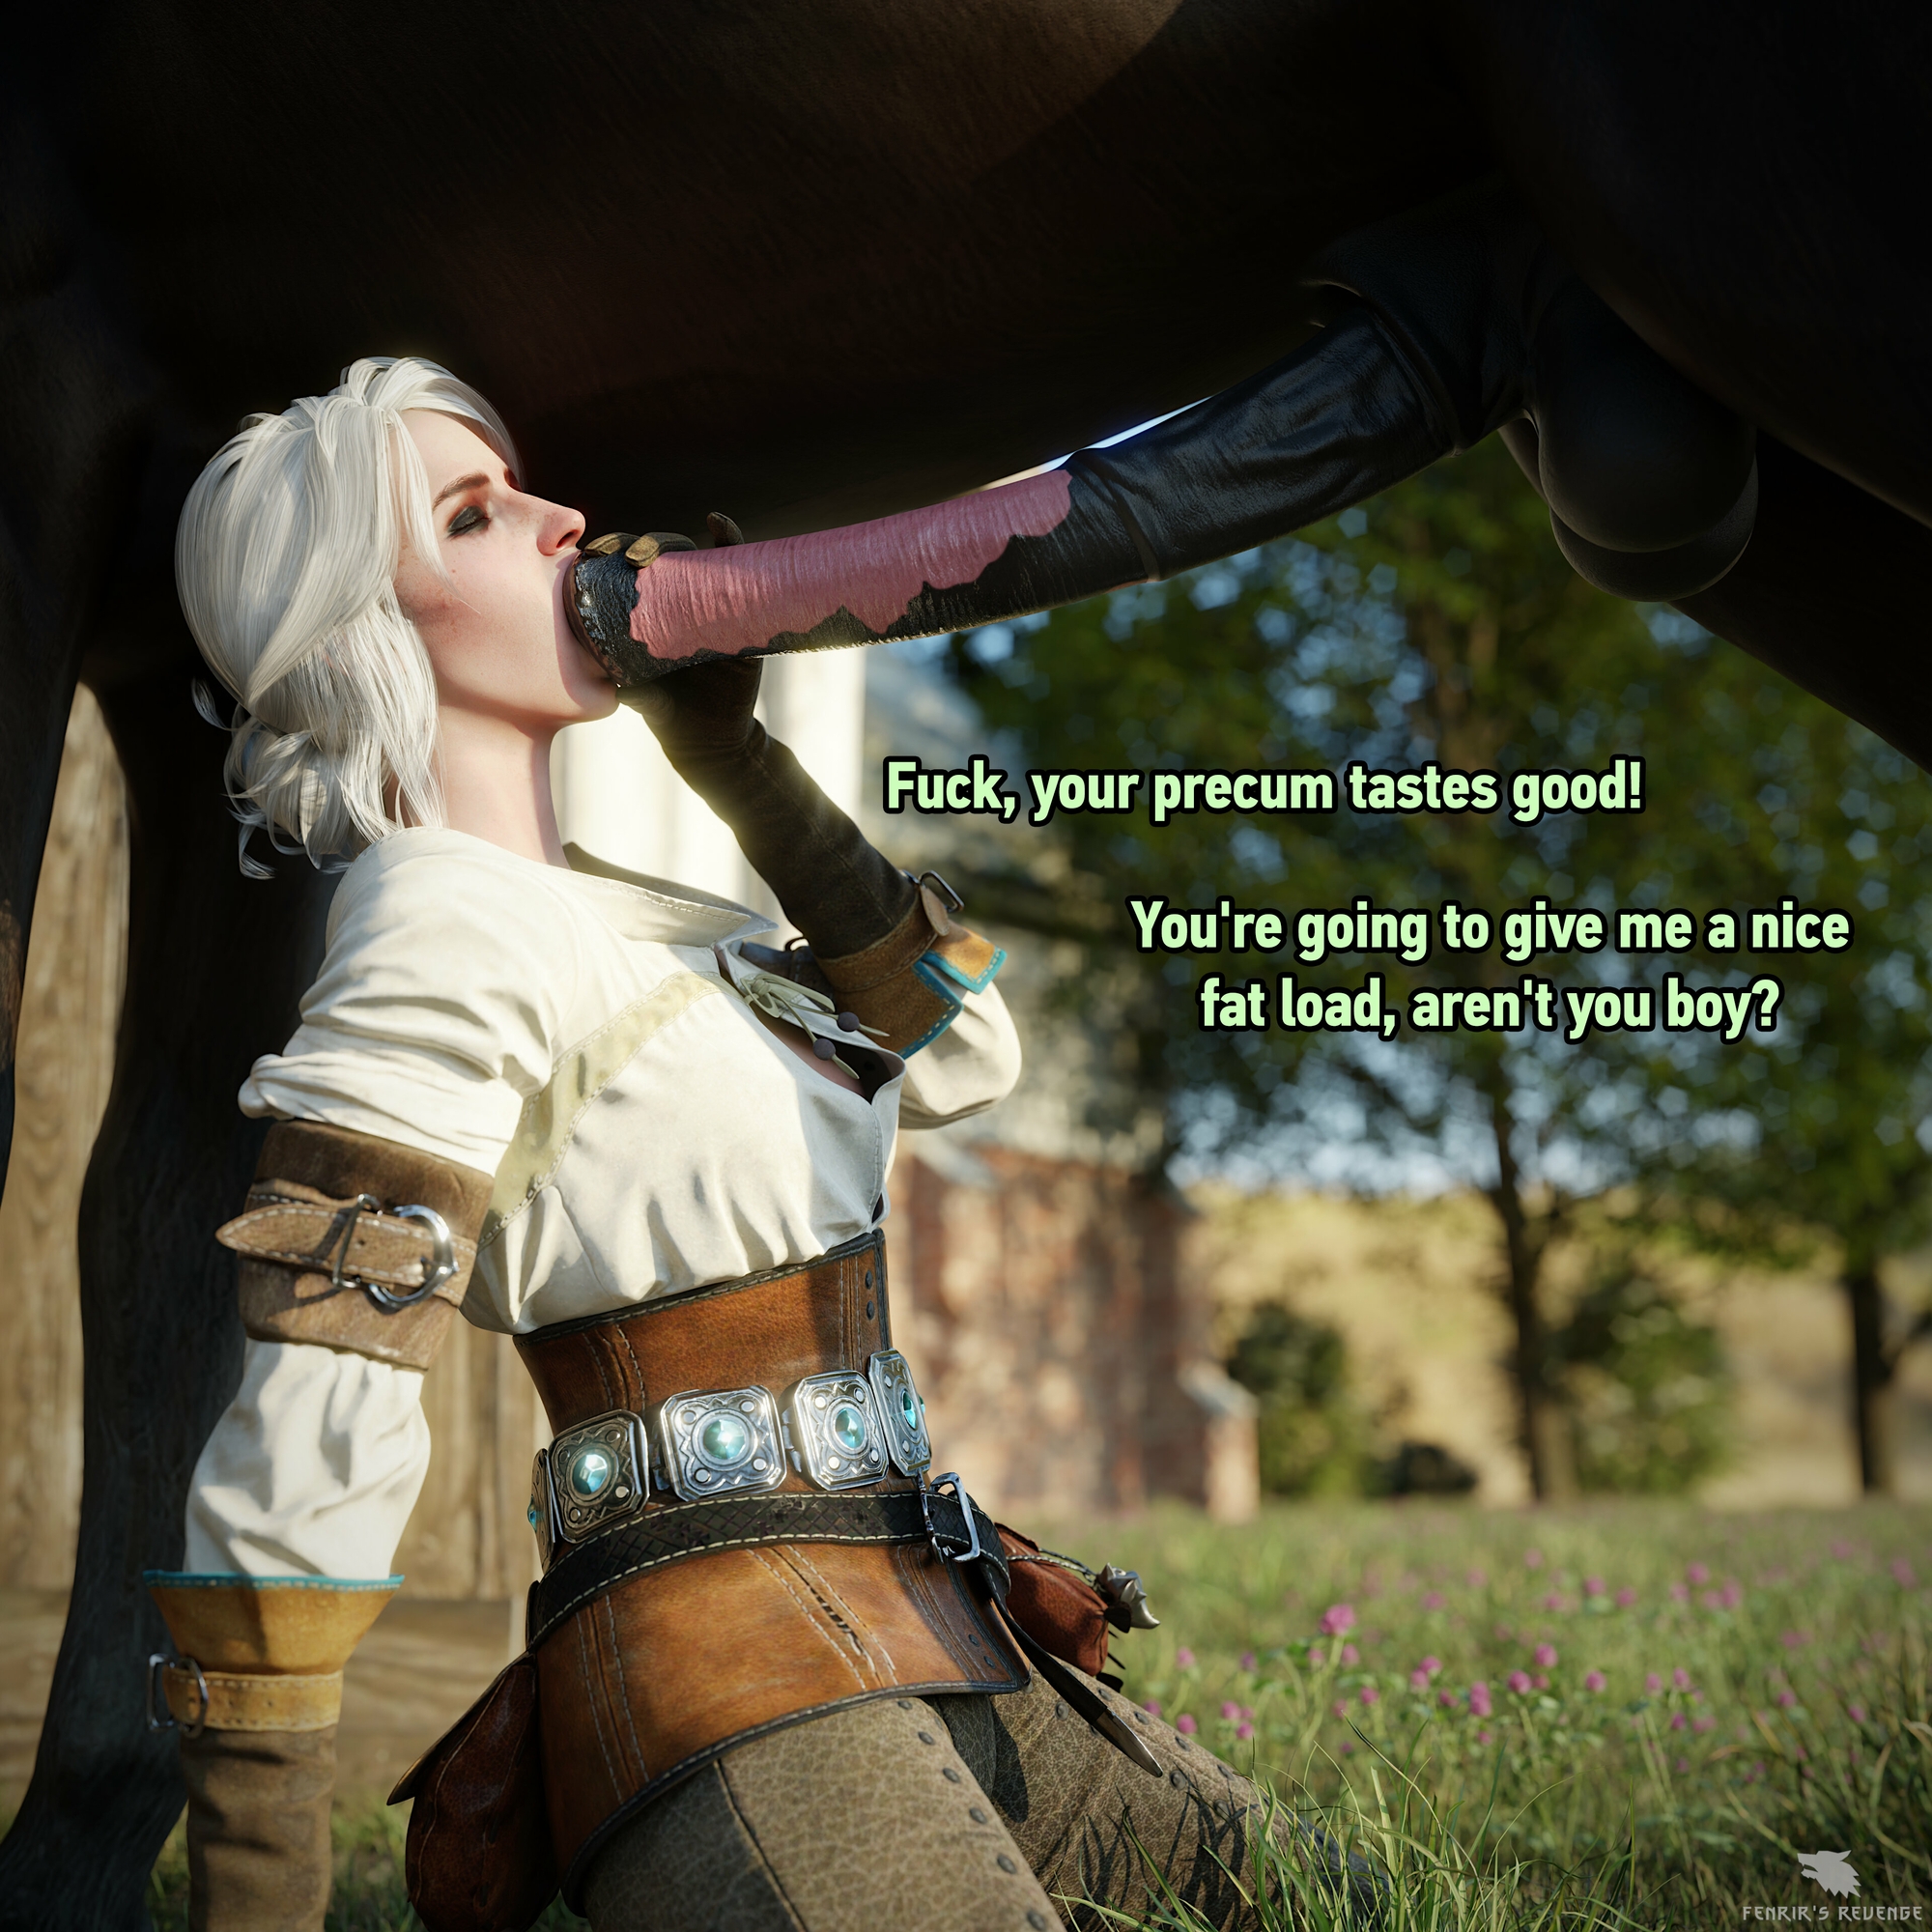 Busted Ciri (The Witcher) The Witcher Horse Horsecock Blowjob Deep throat 3